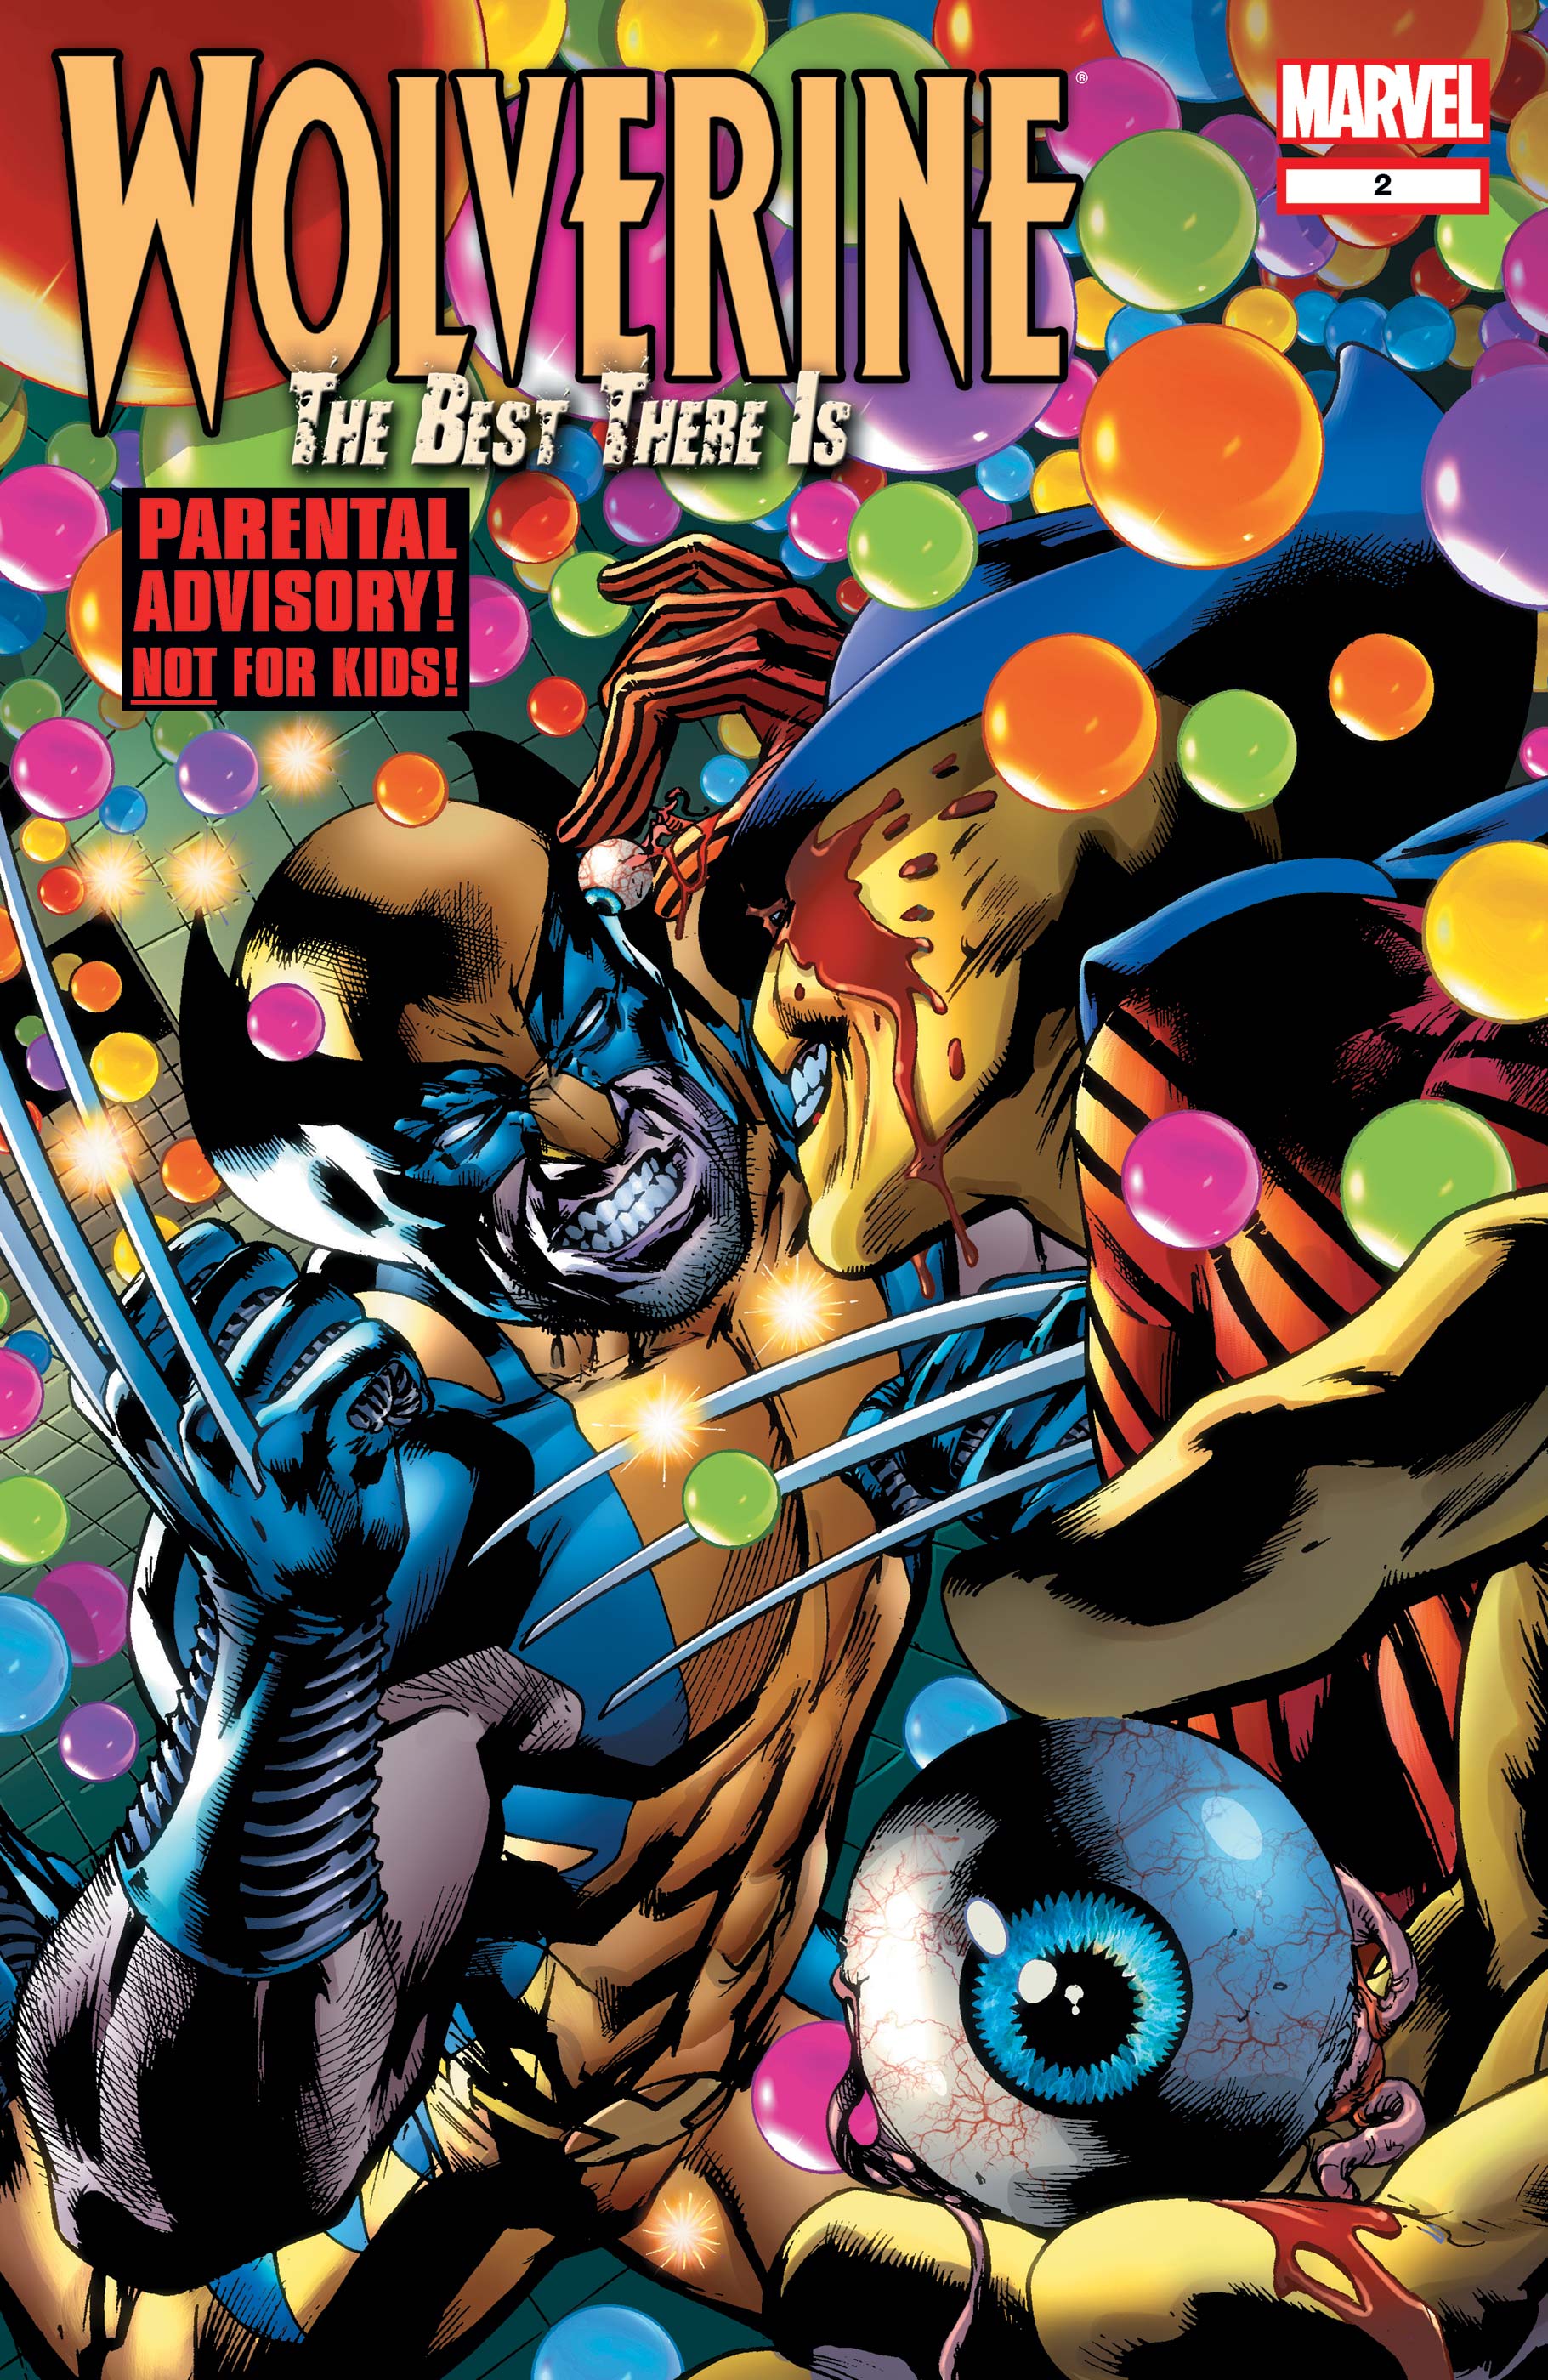 Wolverine: The Best There Is (2010) #2